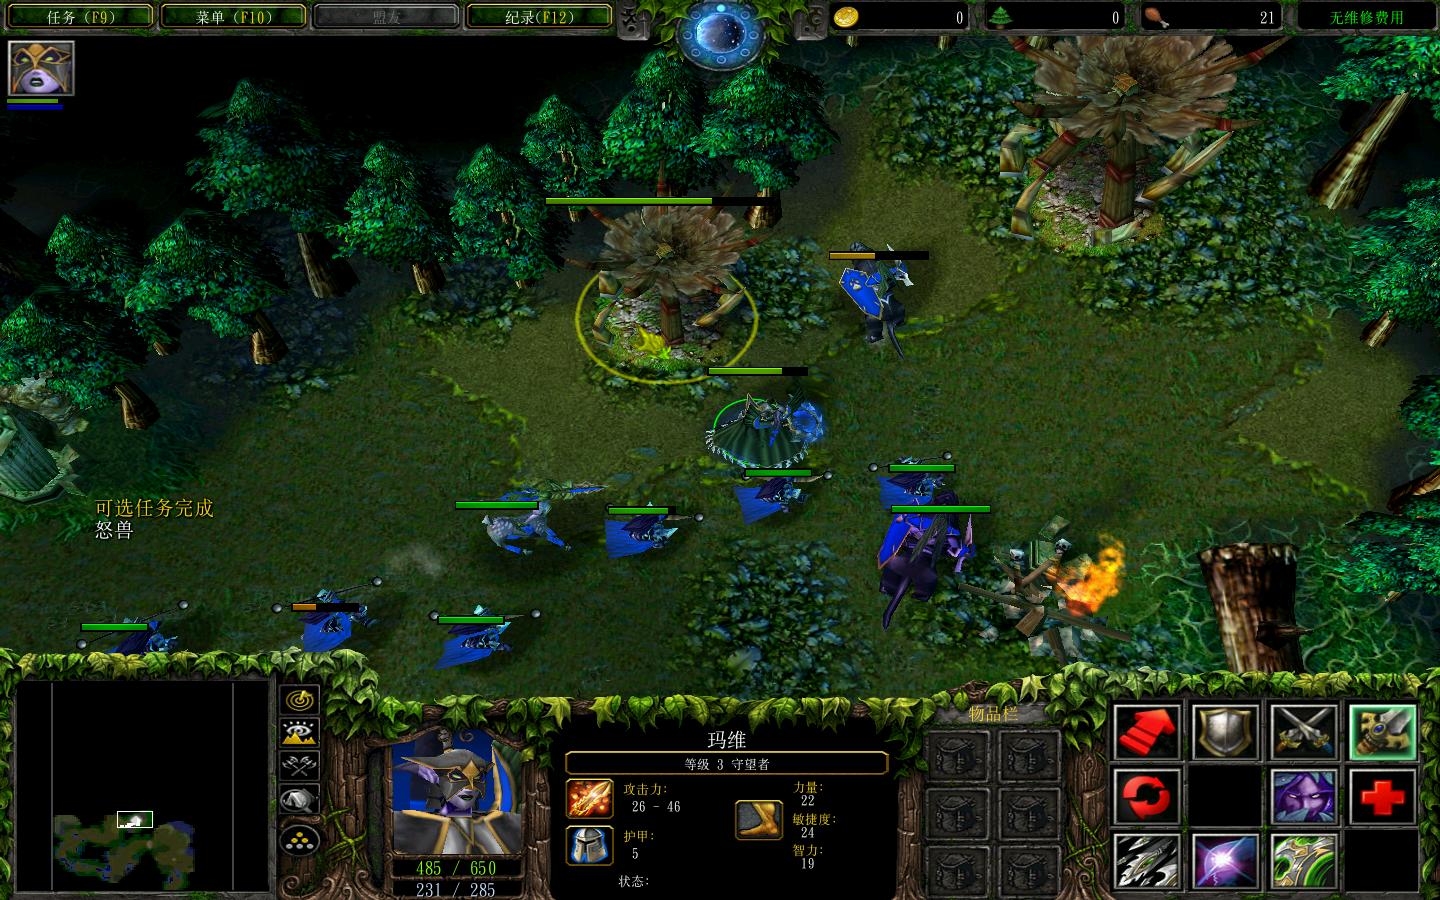 ħ3Warcraft III The Frozen Thronev1.24Ԫv1.21